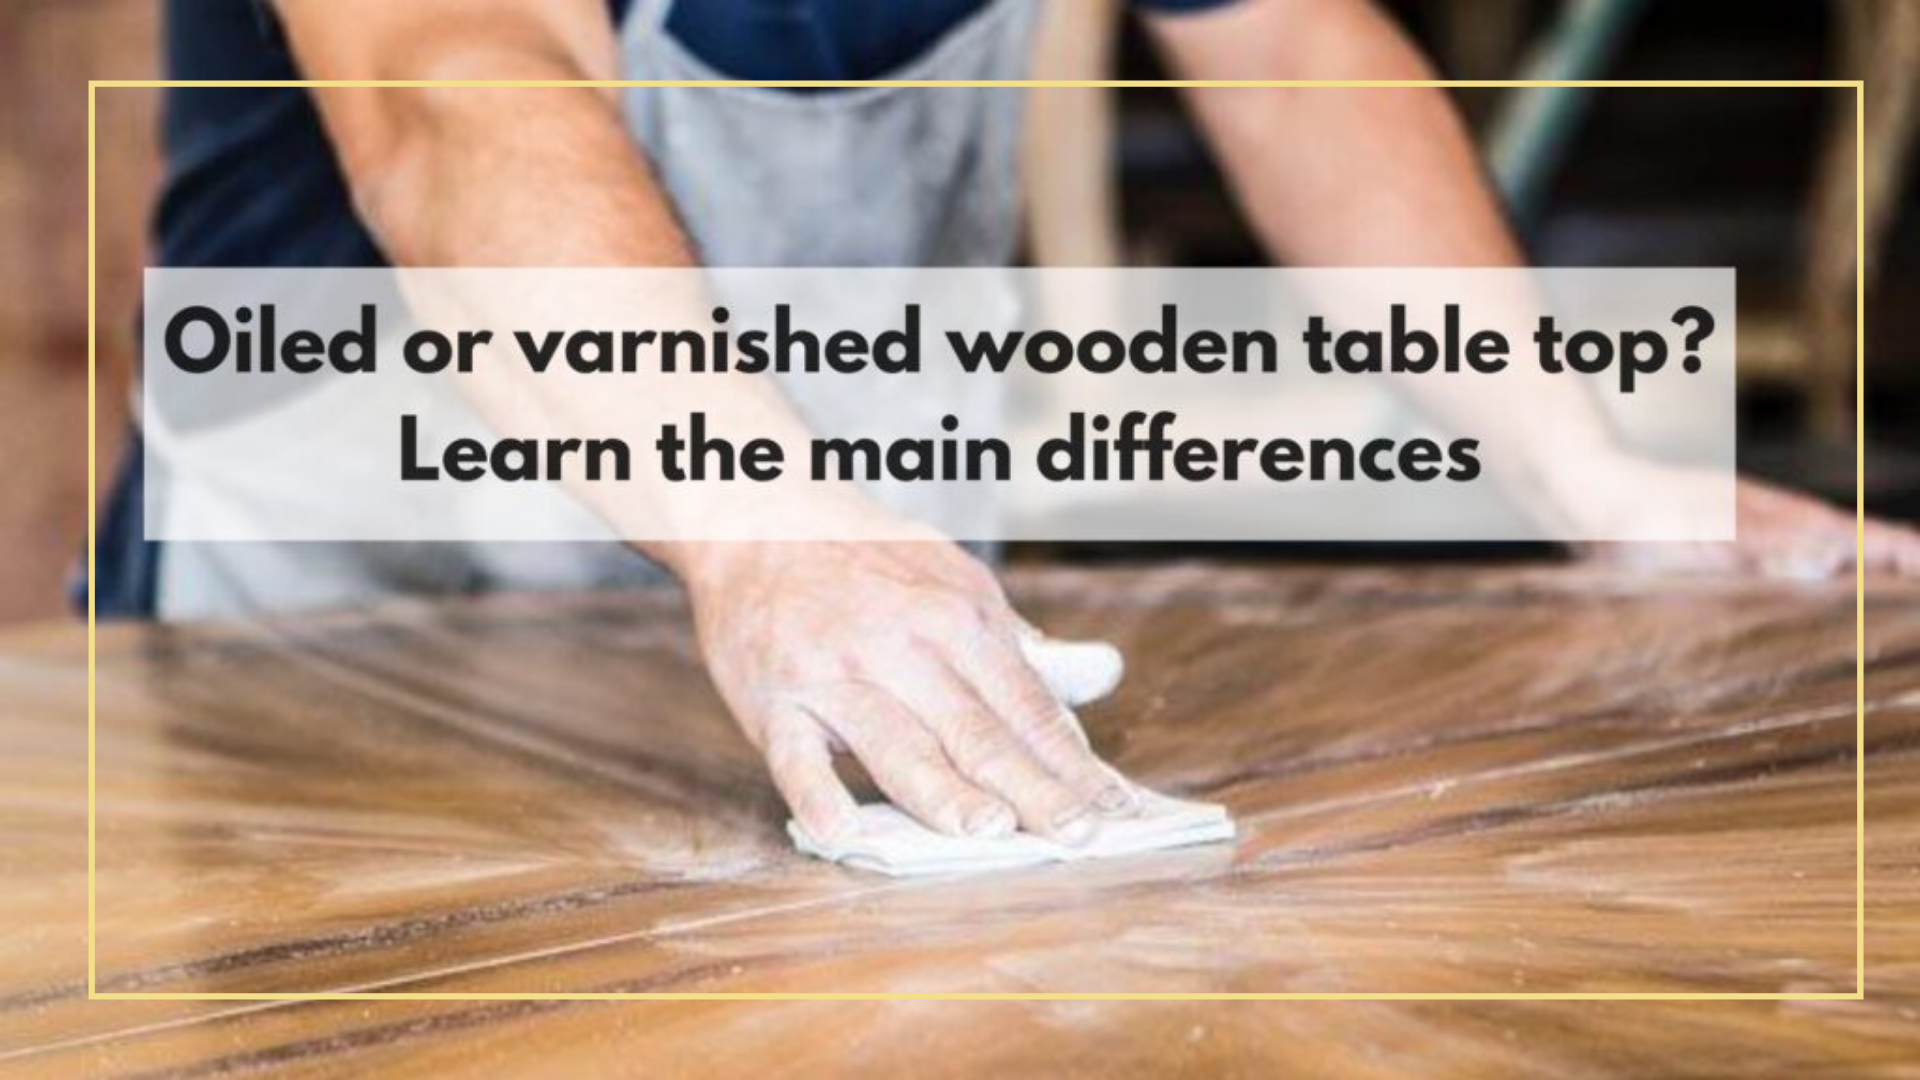 https://sfd-craft.com/wp-content/uploads/2020/08/Oiled-or-varnished-wooden-table-top_-Learn-the-main-differences.png